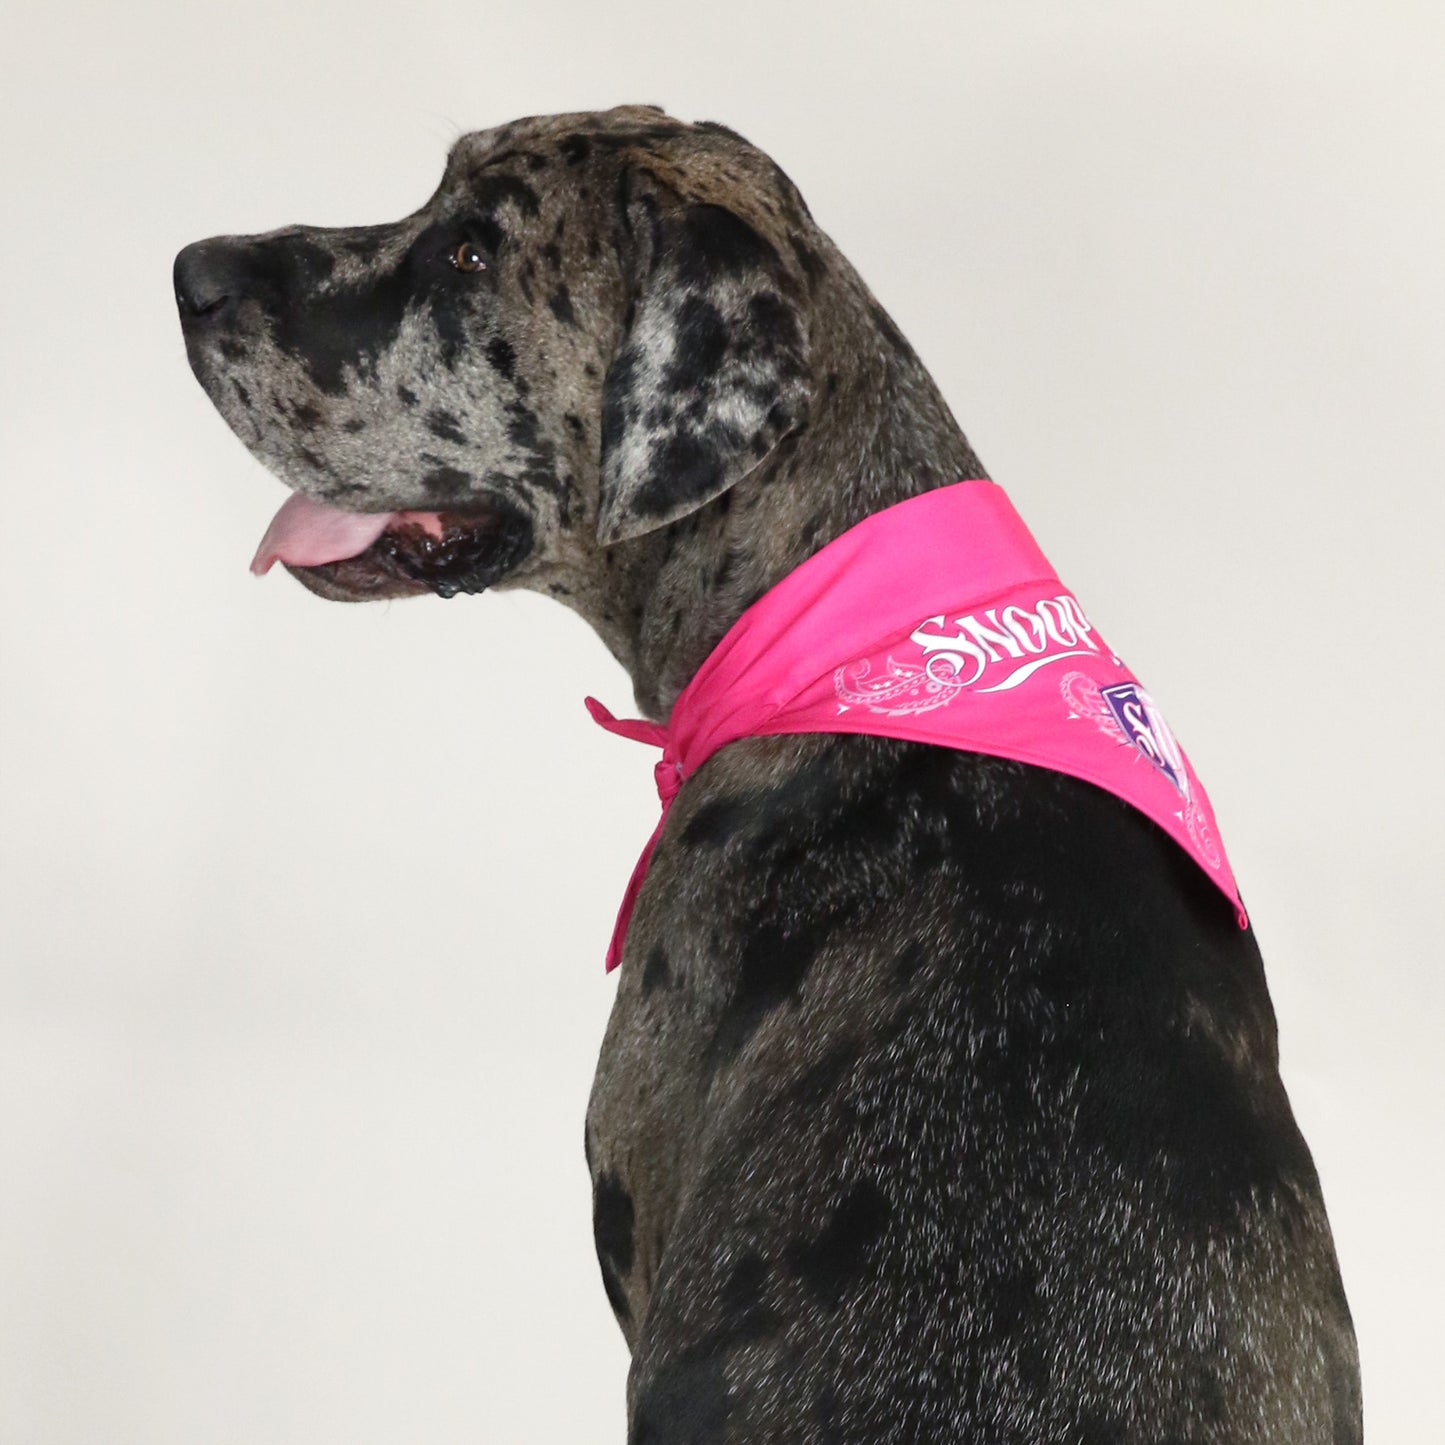 Rookie the Great Dane wearing the Boss Lady Deluxe Pet Bandana in size Extra Large.